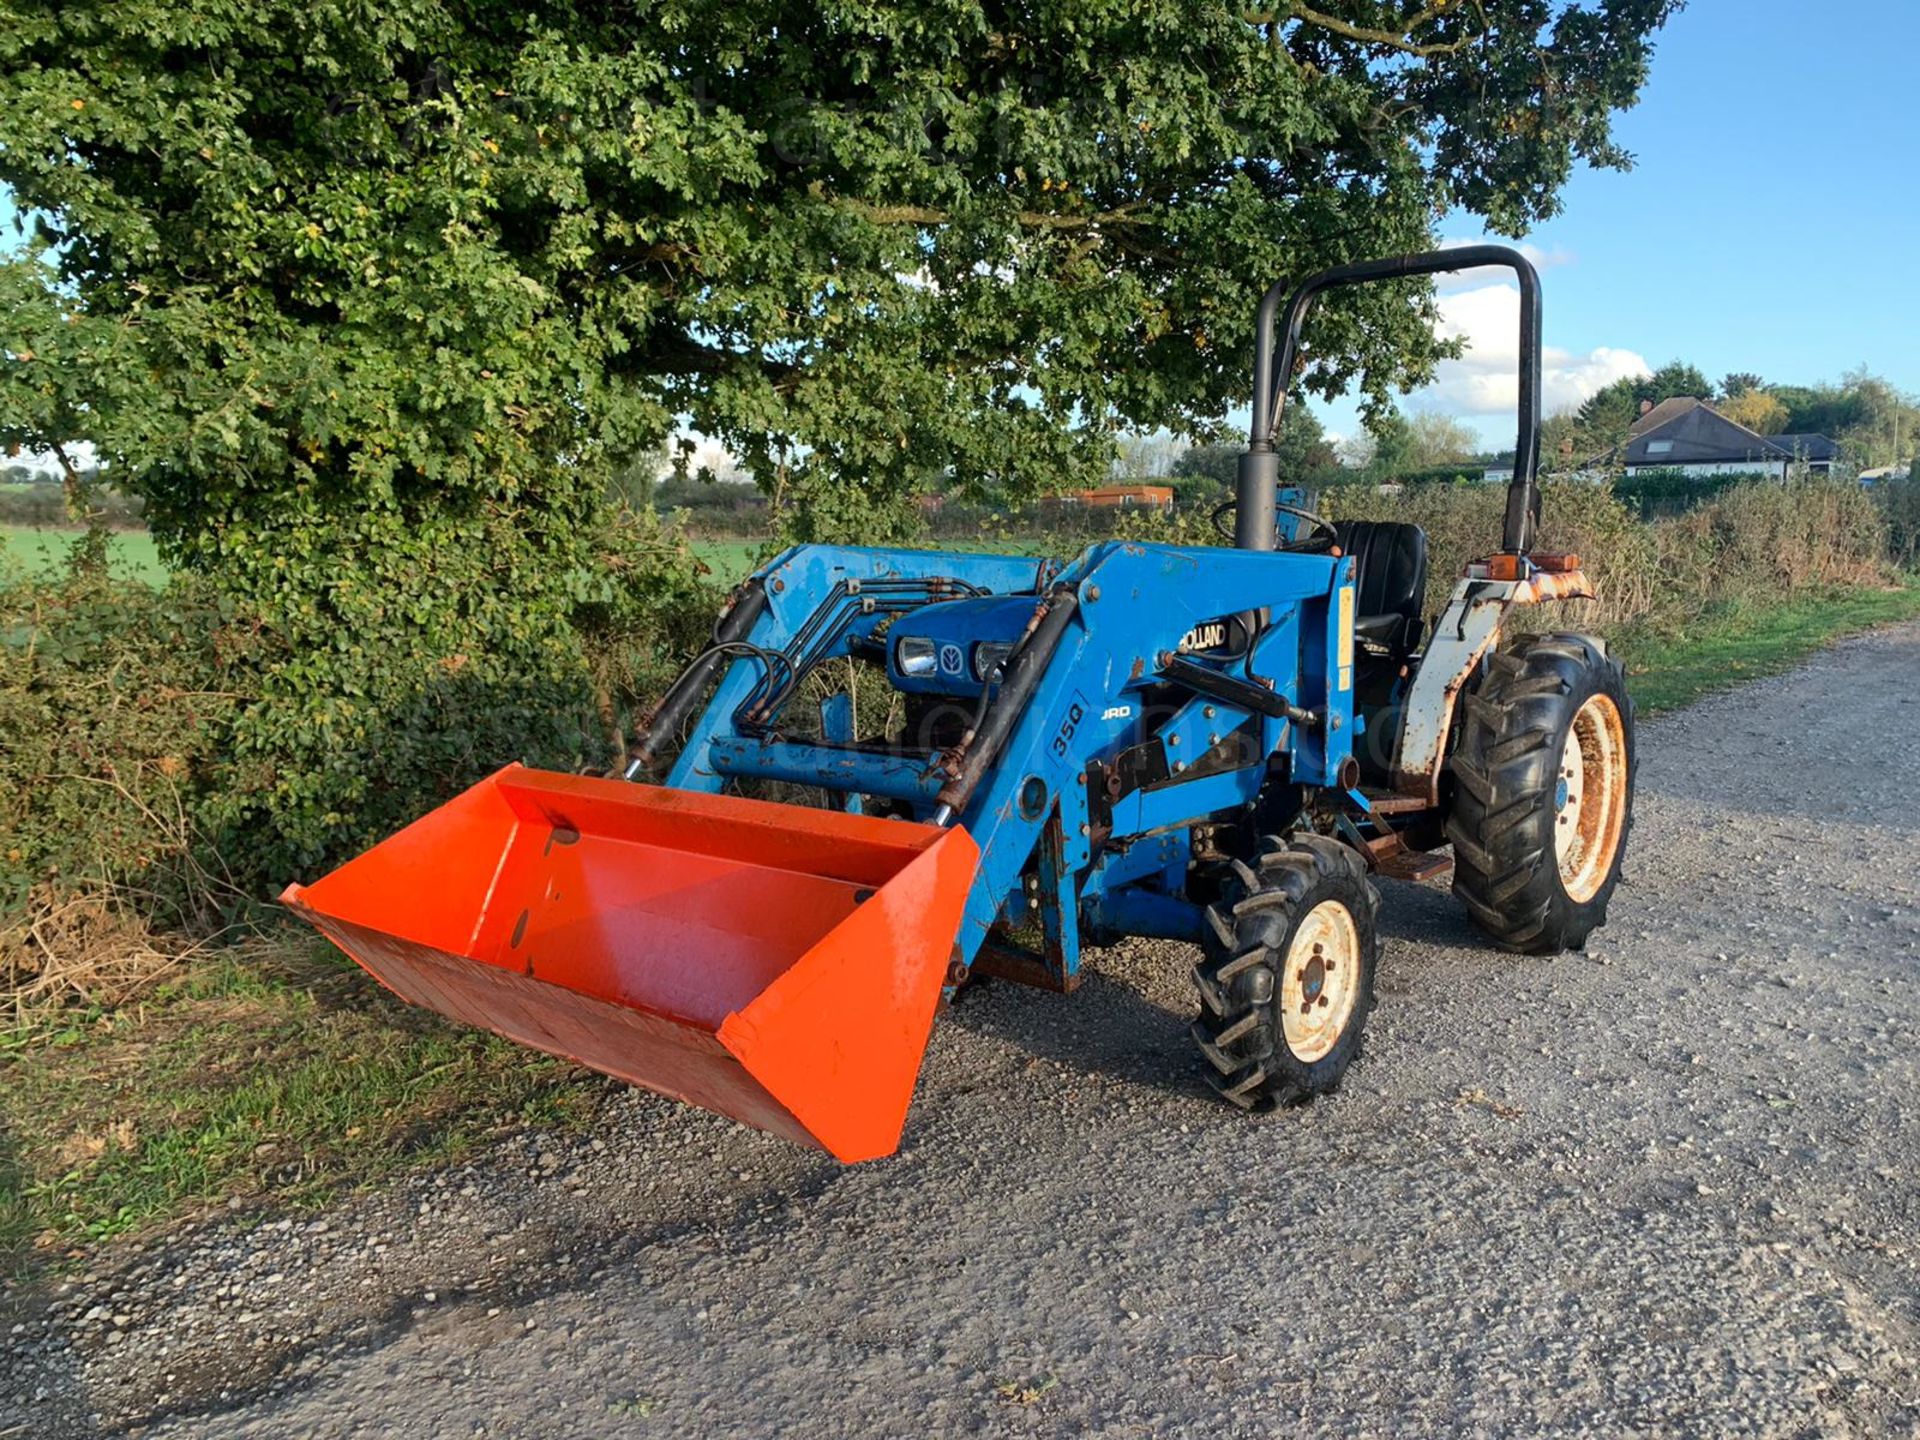 FORD 1720 28hp 4WD COMPACT TRACTOR WITH LEWIS 35Q FRONT LOADER AND BUCKET, RUNS DRIVES LIFTS WELL - Image 4 of 11